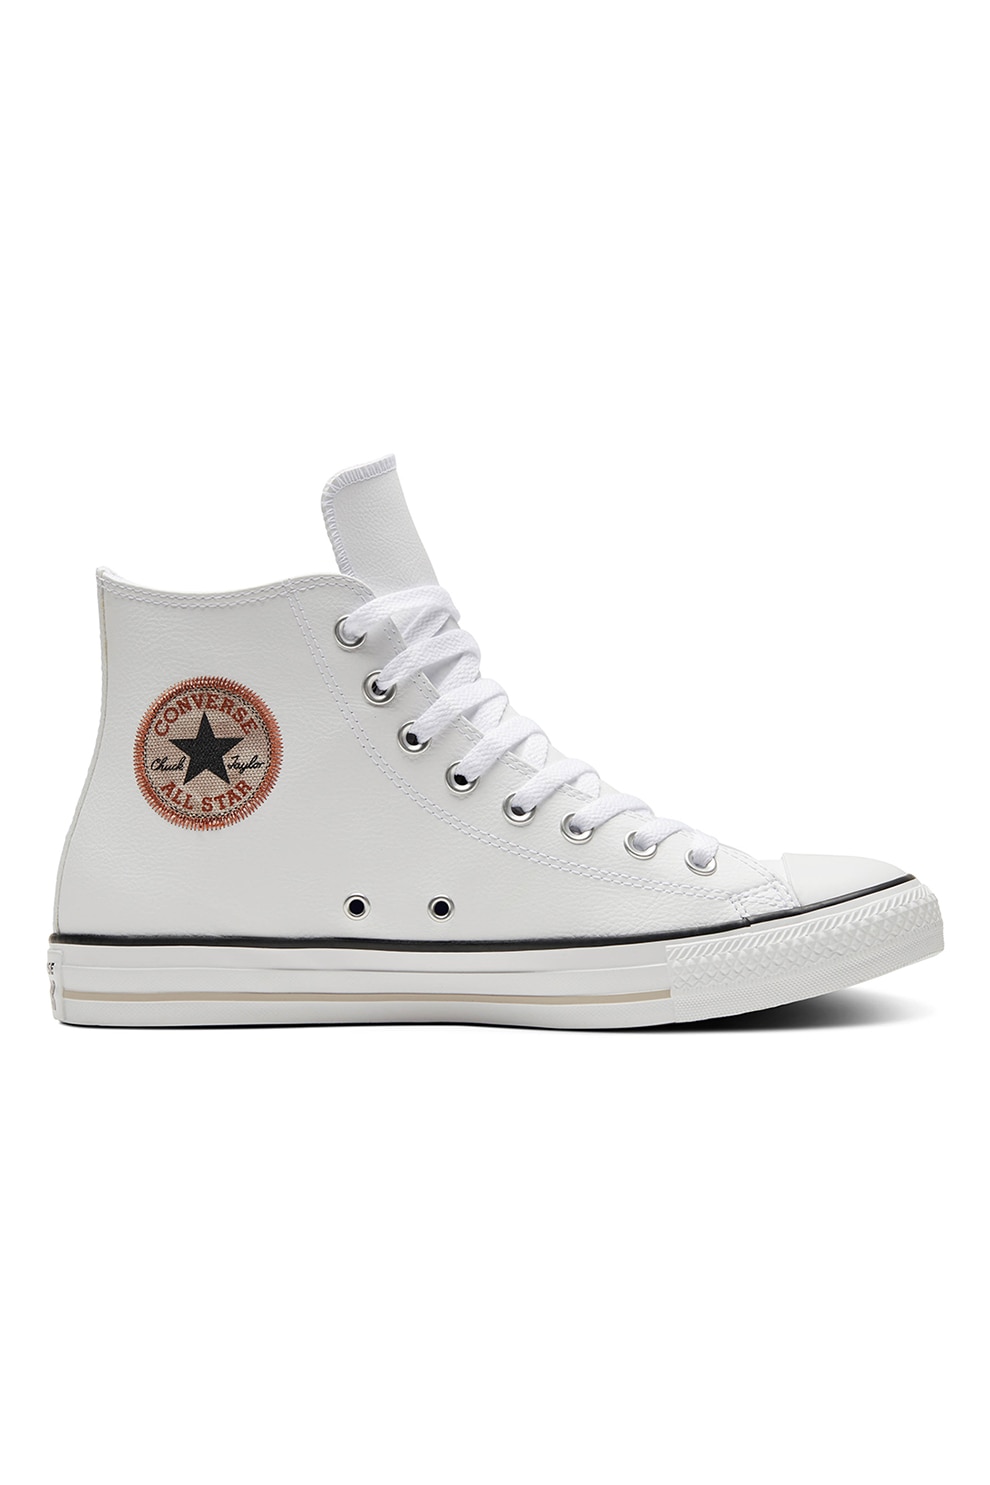 corner chilly Communism Converse, Tenisi unisex high top Chuck Taylor All Star, Alb, 11 - eMAG.ro